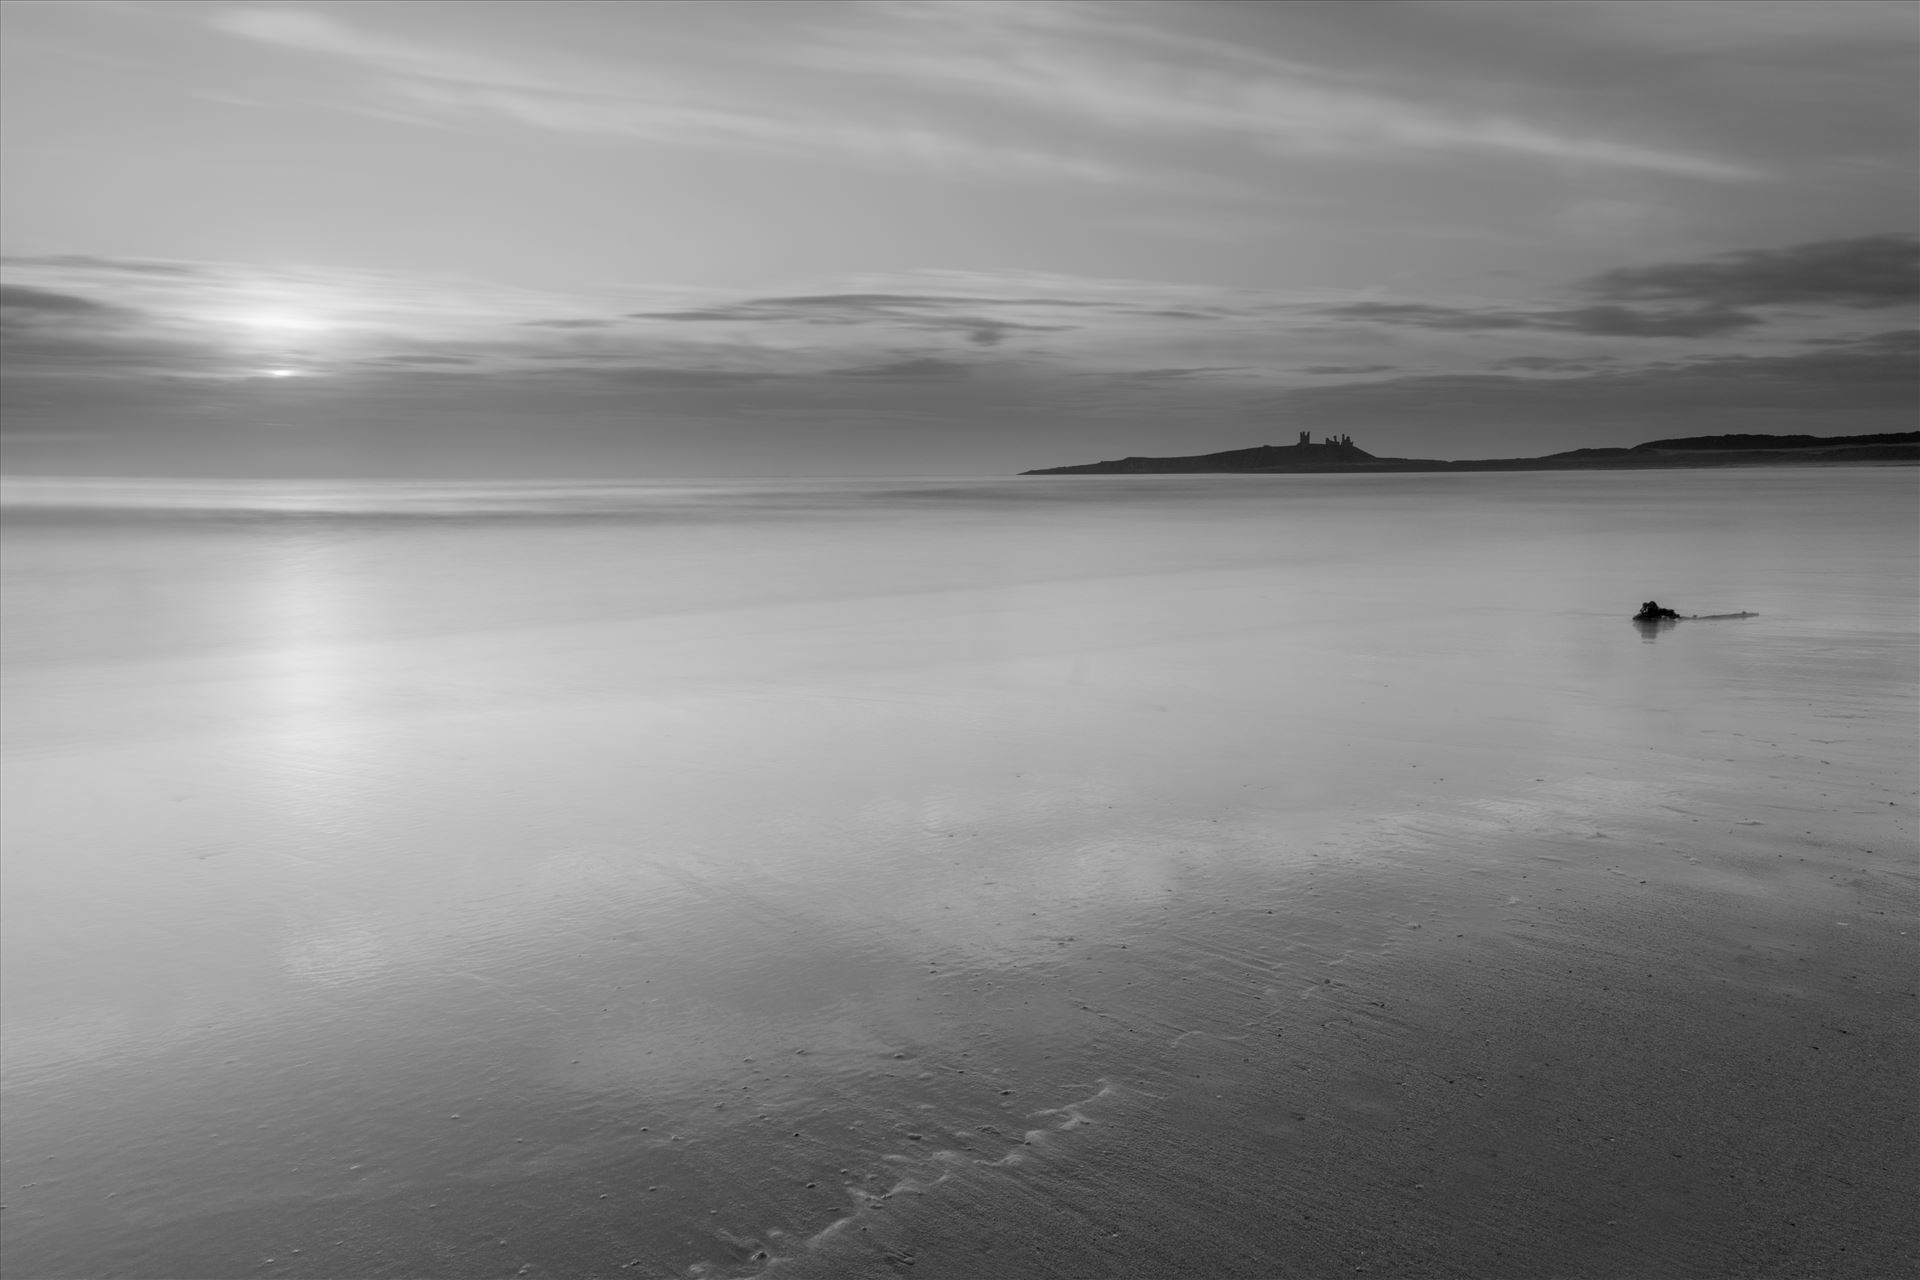 Sunrise at Embleton Bay, Northumberland. (also in colour) Embleton Bay is a bay on the North Sea, located to the east of the village of Embleton, Northumberland, England. It lies just to the south of Newton-by-the-Sea and north of Craster by philreay